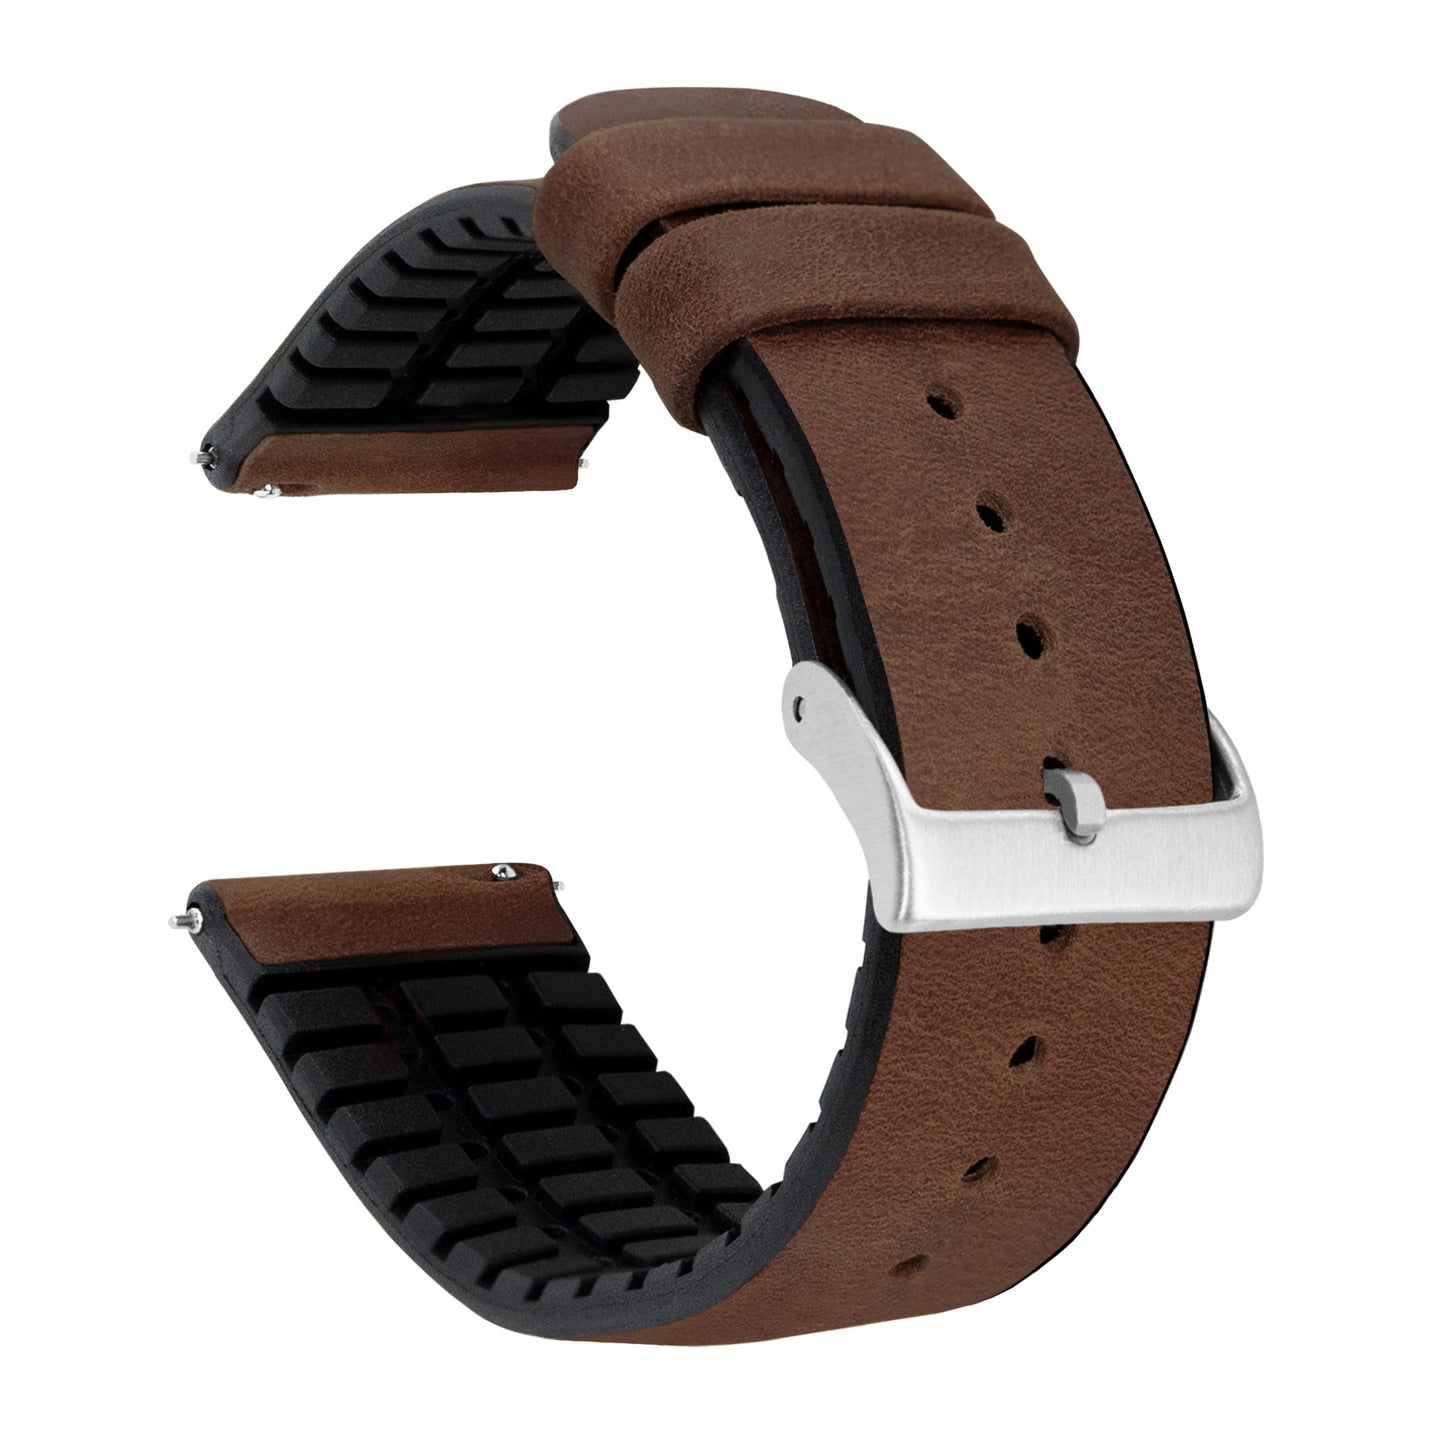 Samsung Galaxy Watch Active 2 | Leather and Rubber Hybrid | Walnut Brown - Barton Watch Bands